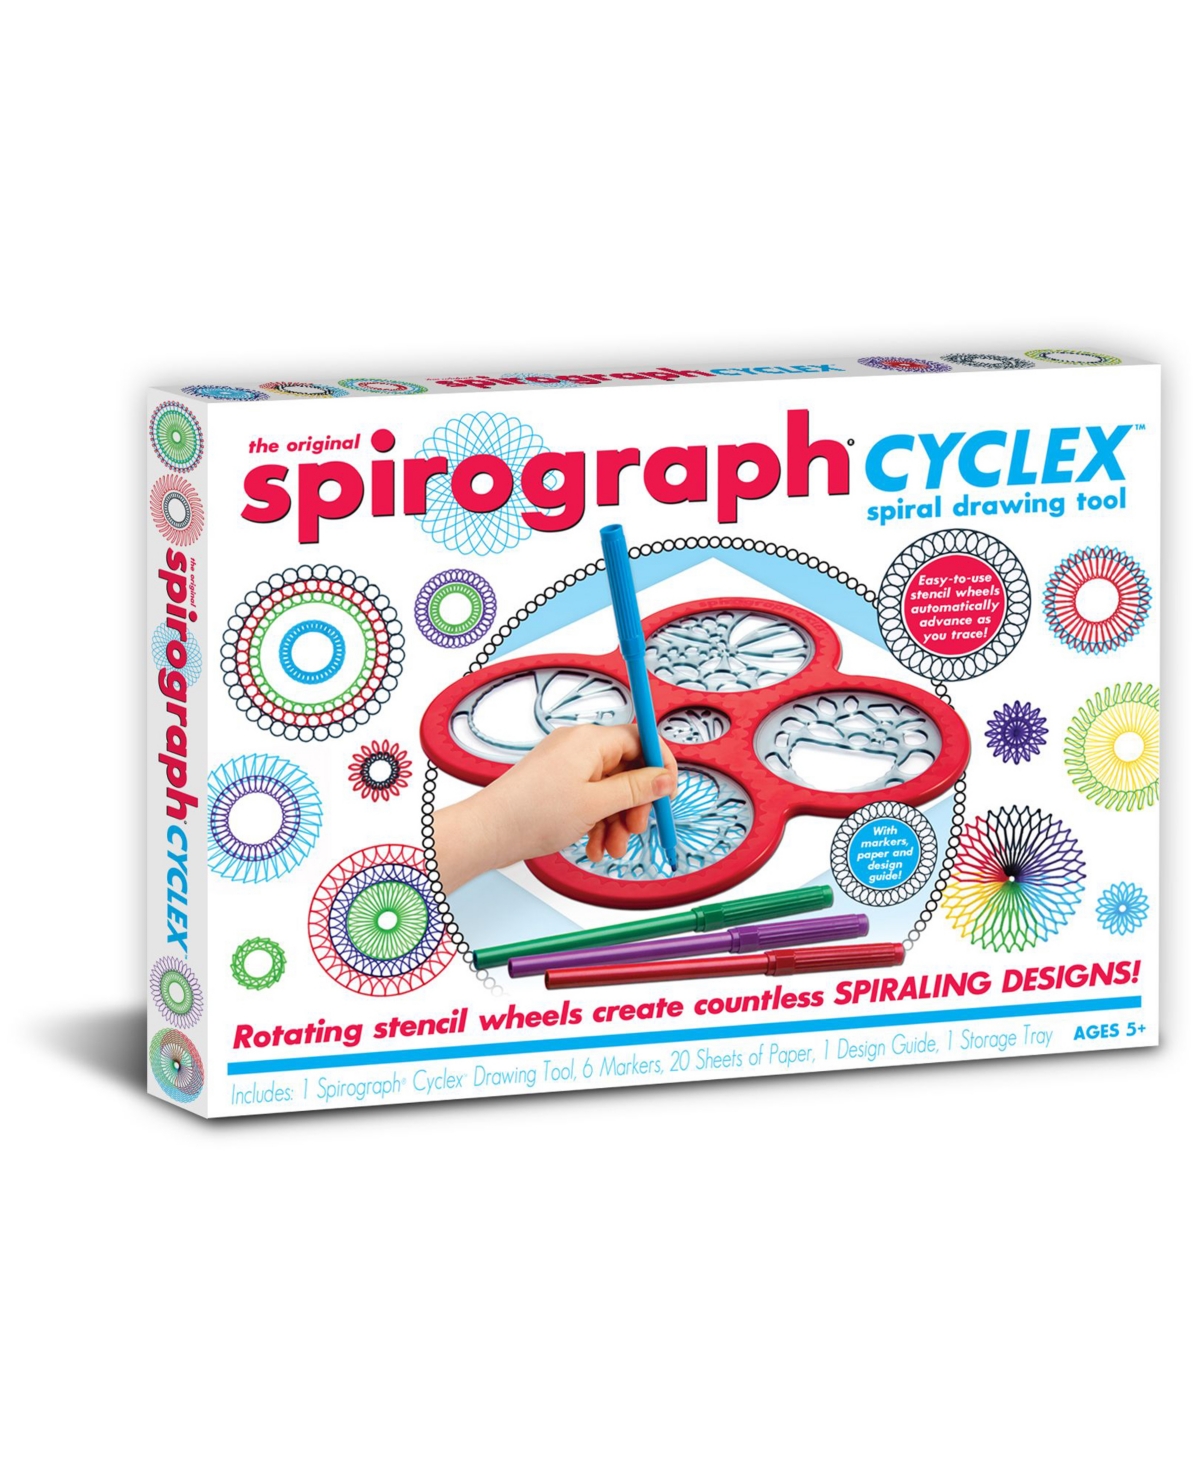 Spirograph Classic Cyclex Spiral Drawing Art Tool Kit In Multi